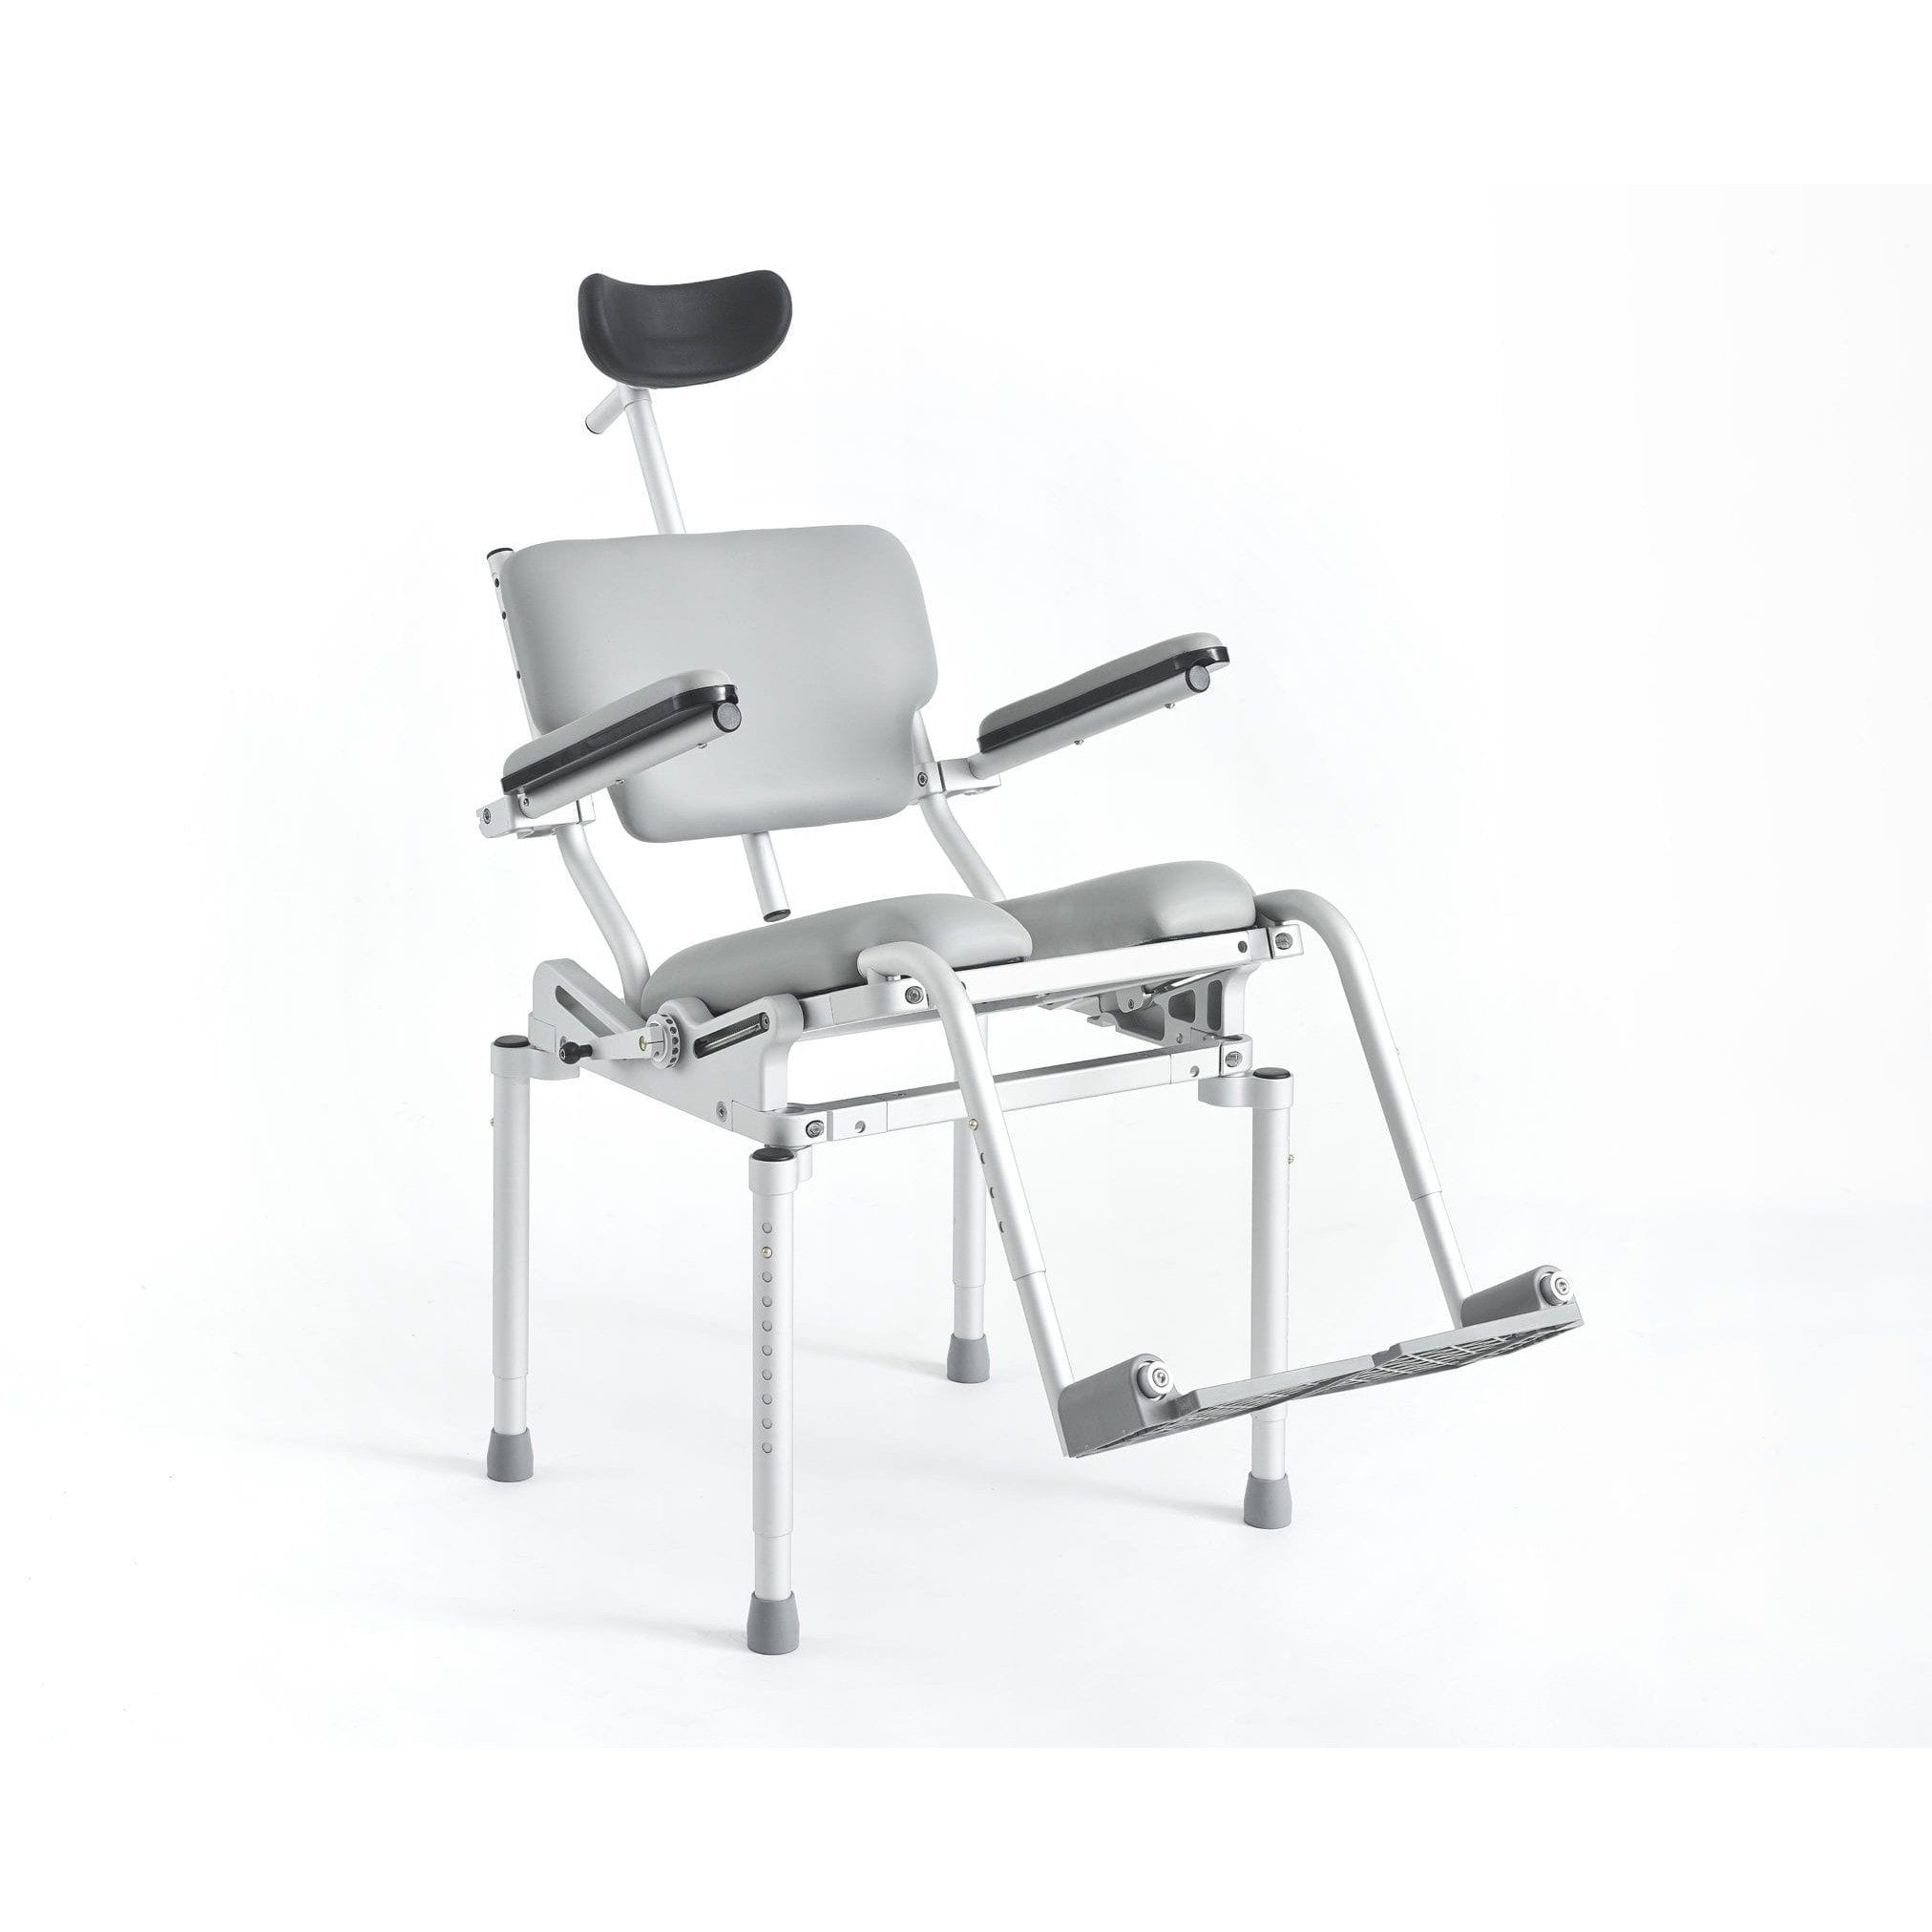 Nuprodx Multichair Stationary Shower and Commode Chair With Tilt-in-space MC3000Tilt